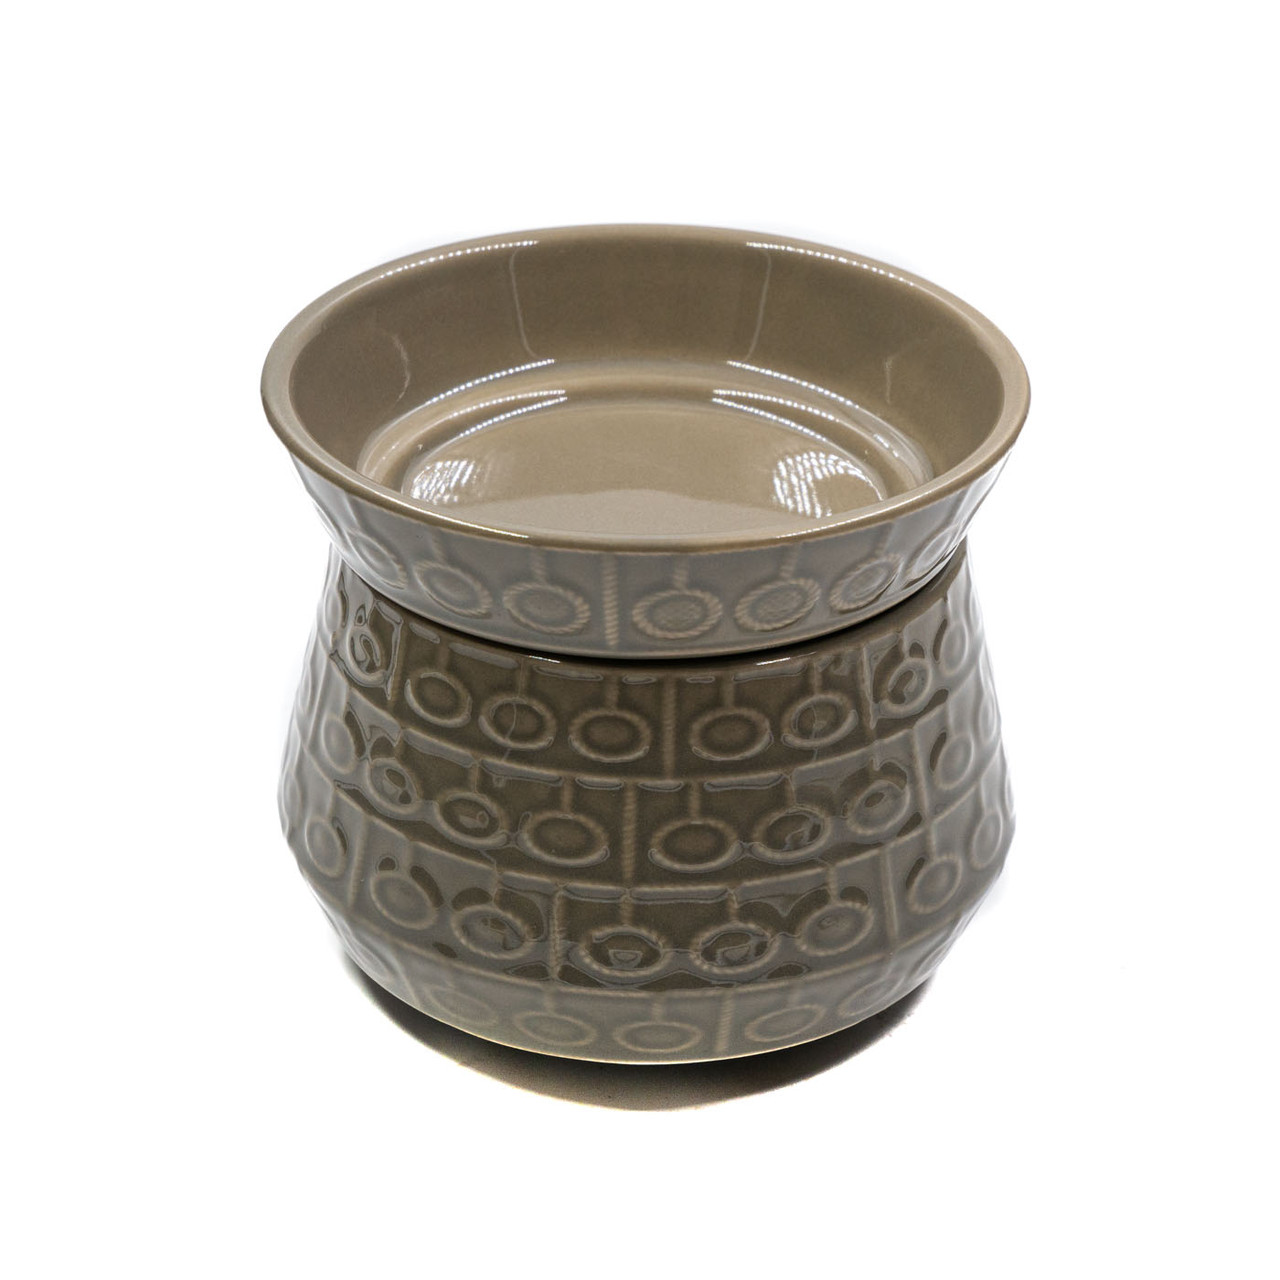 Swan Creek Candles Grey Signature Electric Wax Melter by Swan